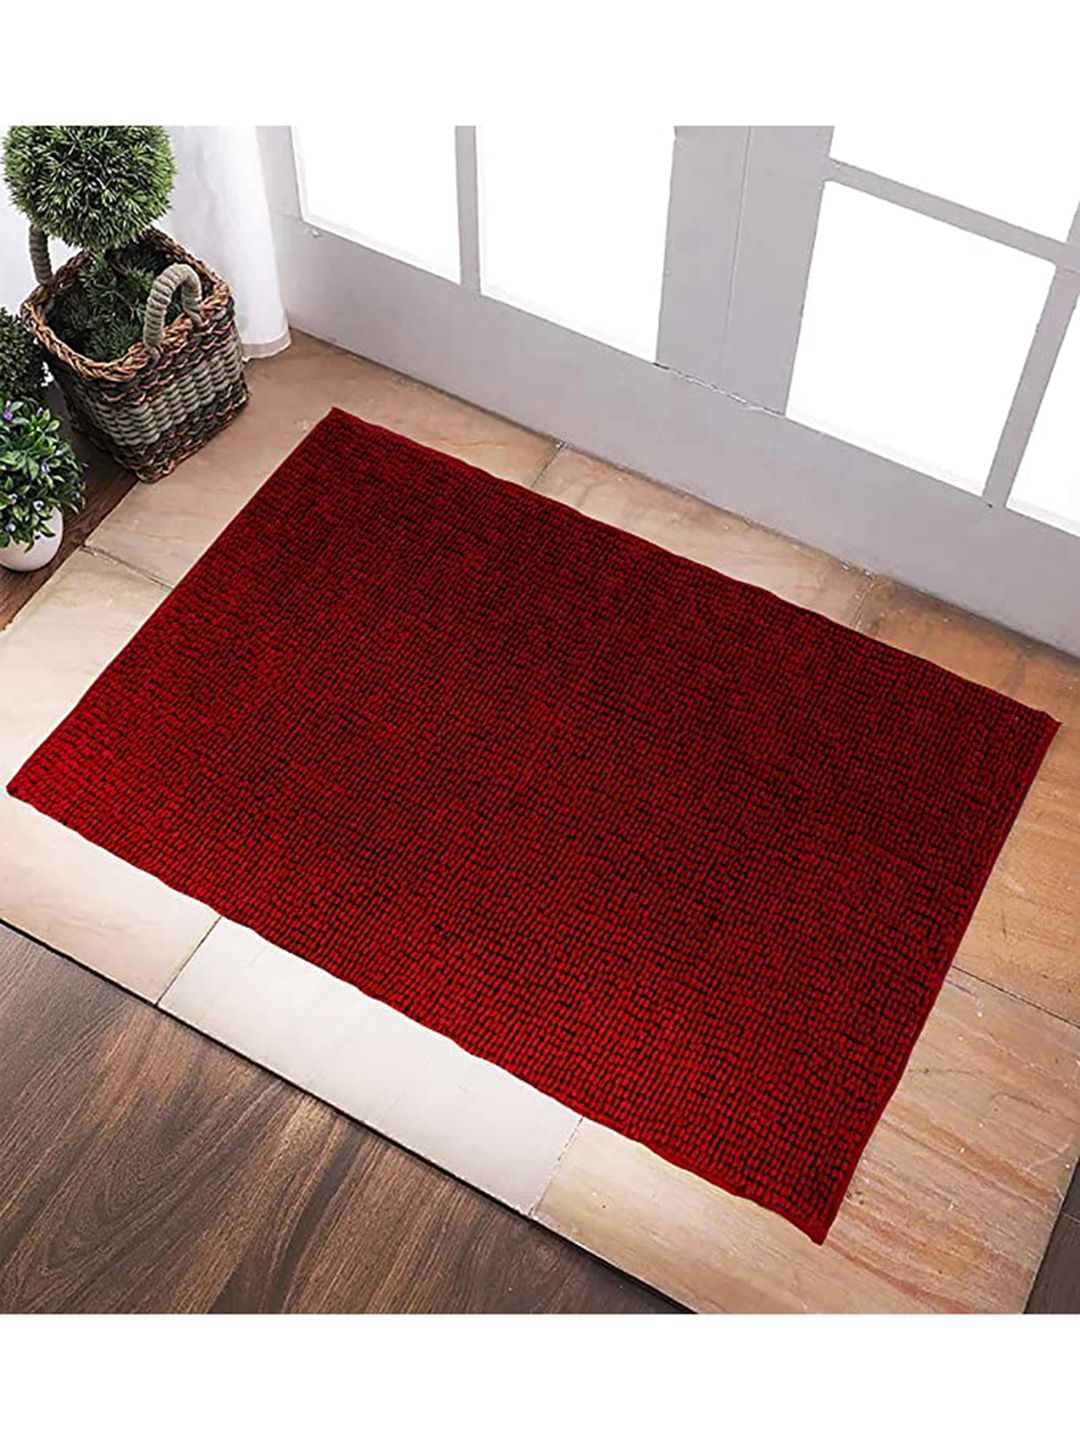 Homitecture Red Solid 1400 GSM Anti-Skid Bath Rug Price in India